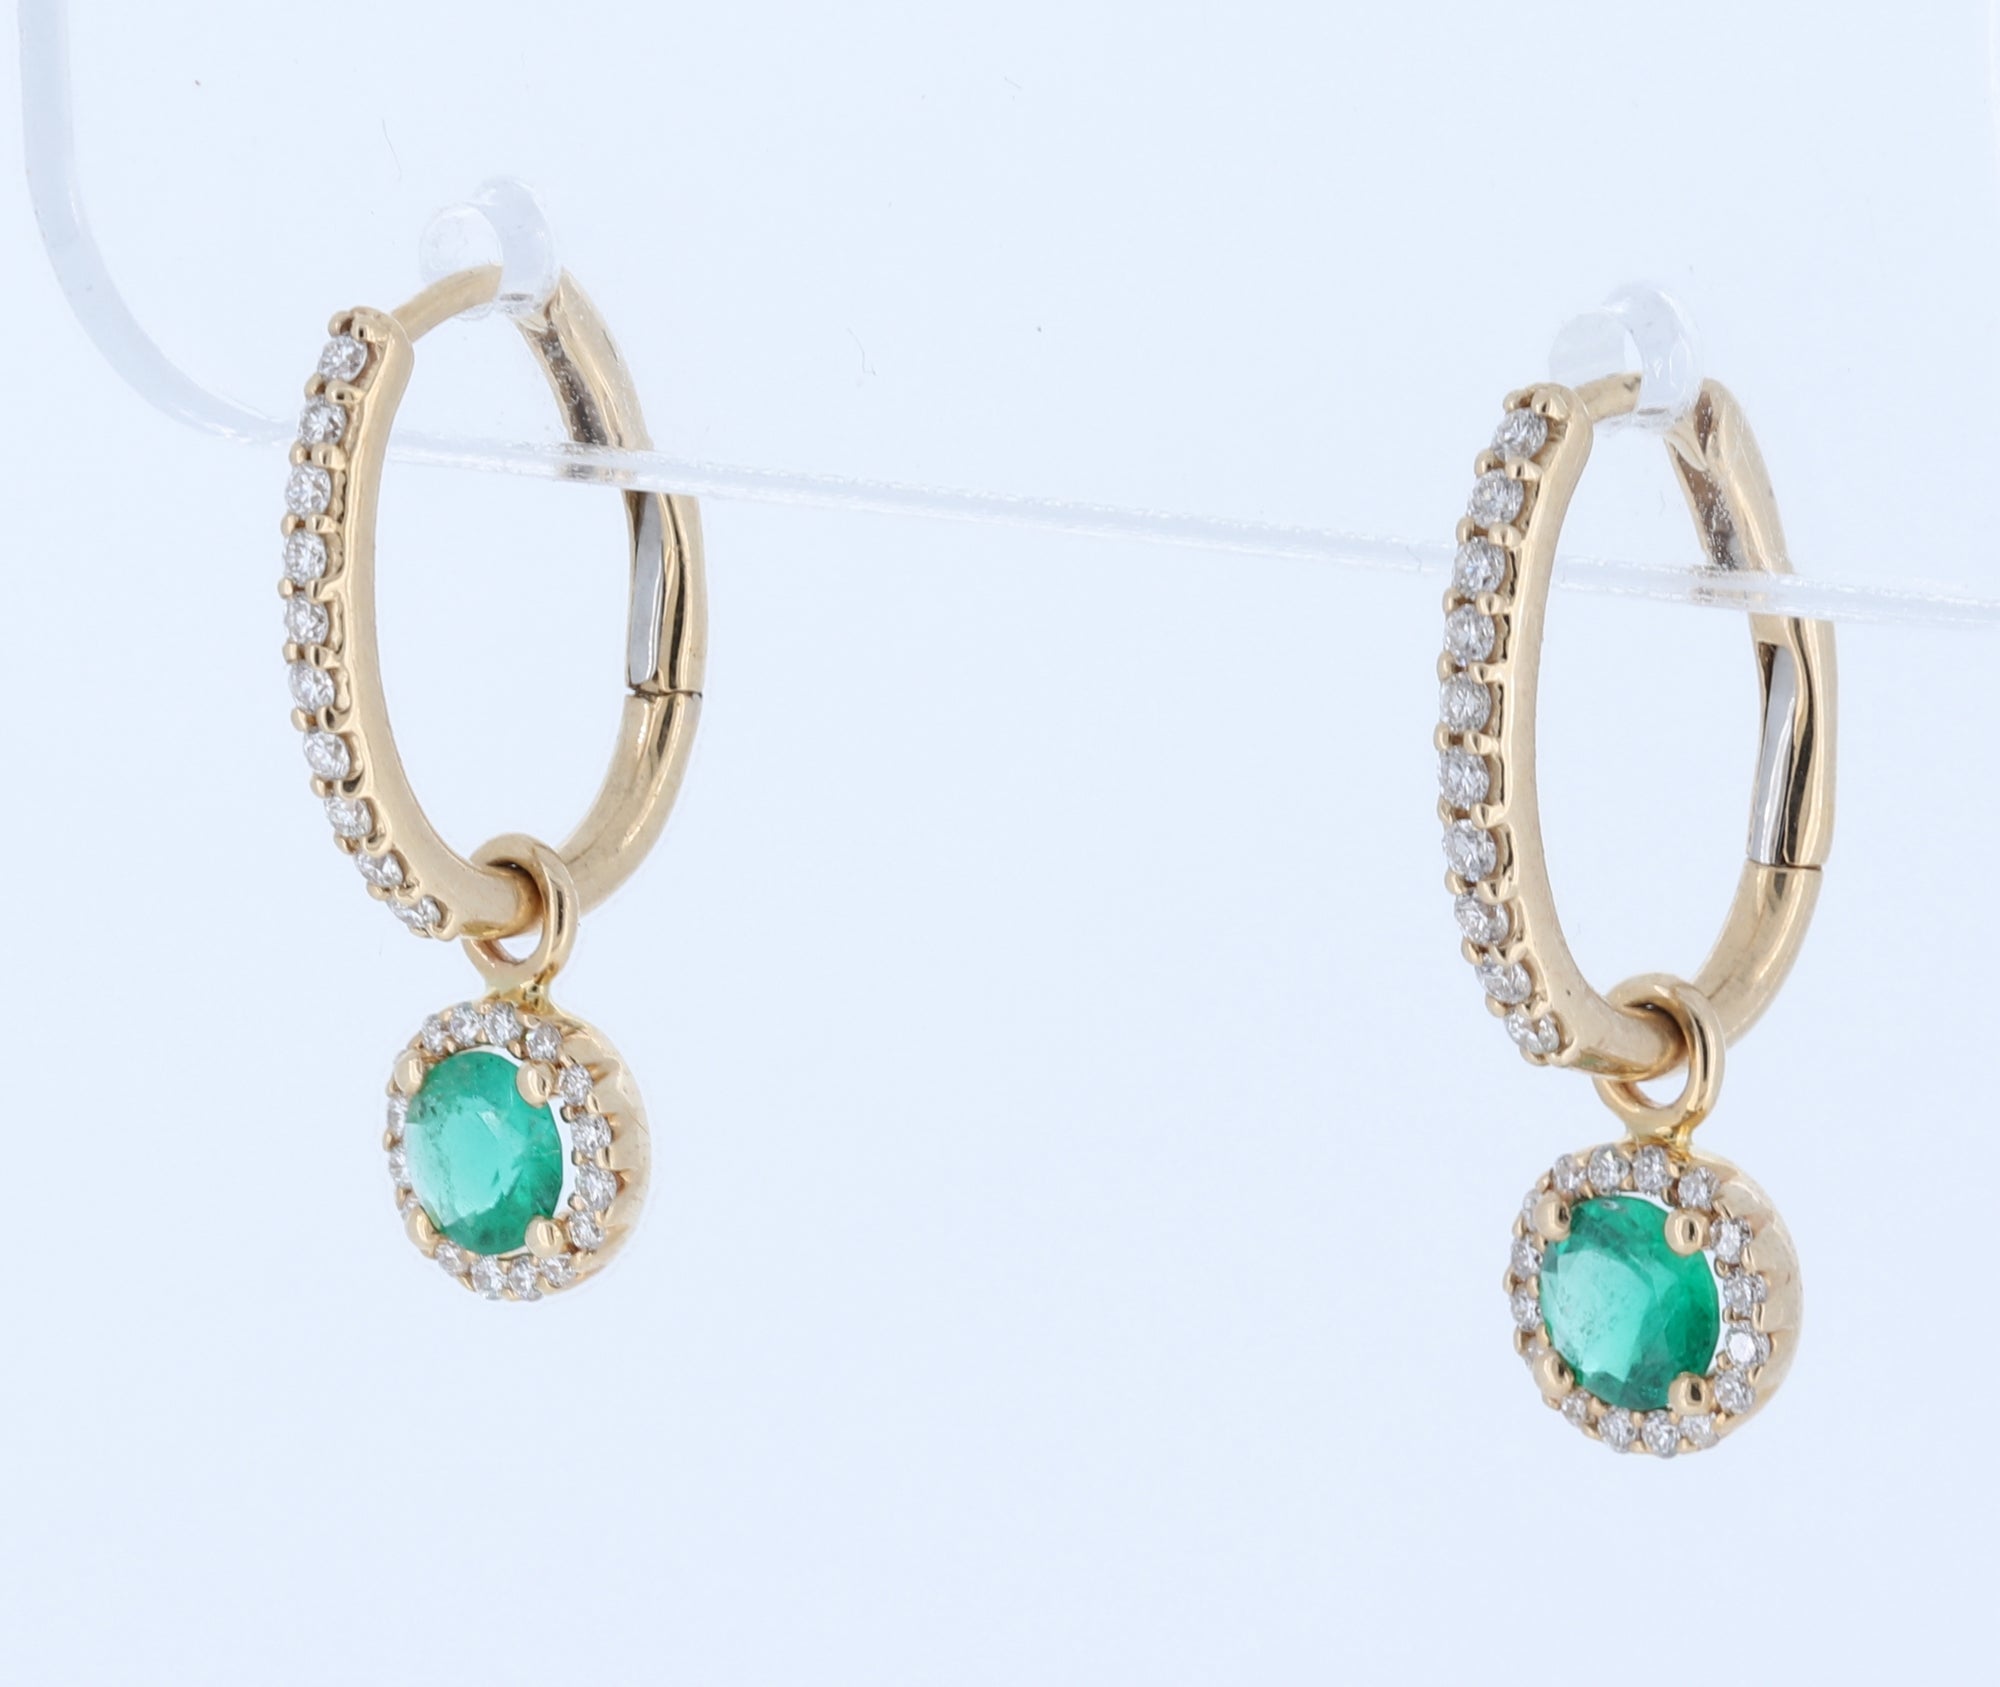 Emerald And Diamond Halo Drop Earrings With Detachable Backs In 14Kt Yellow Gold